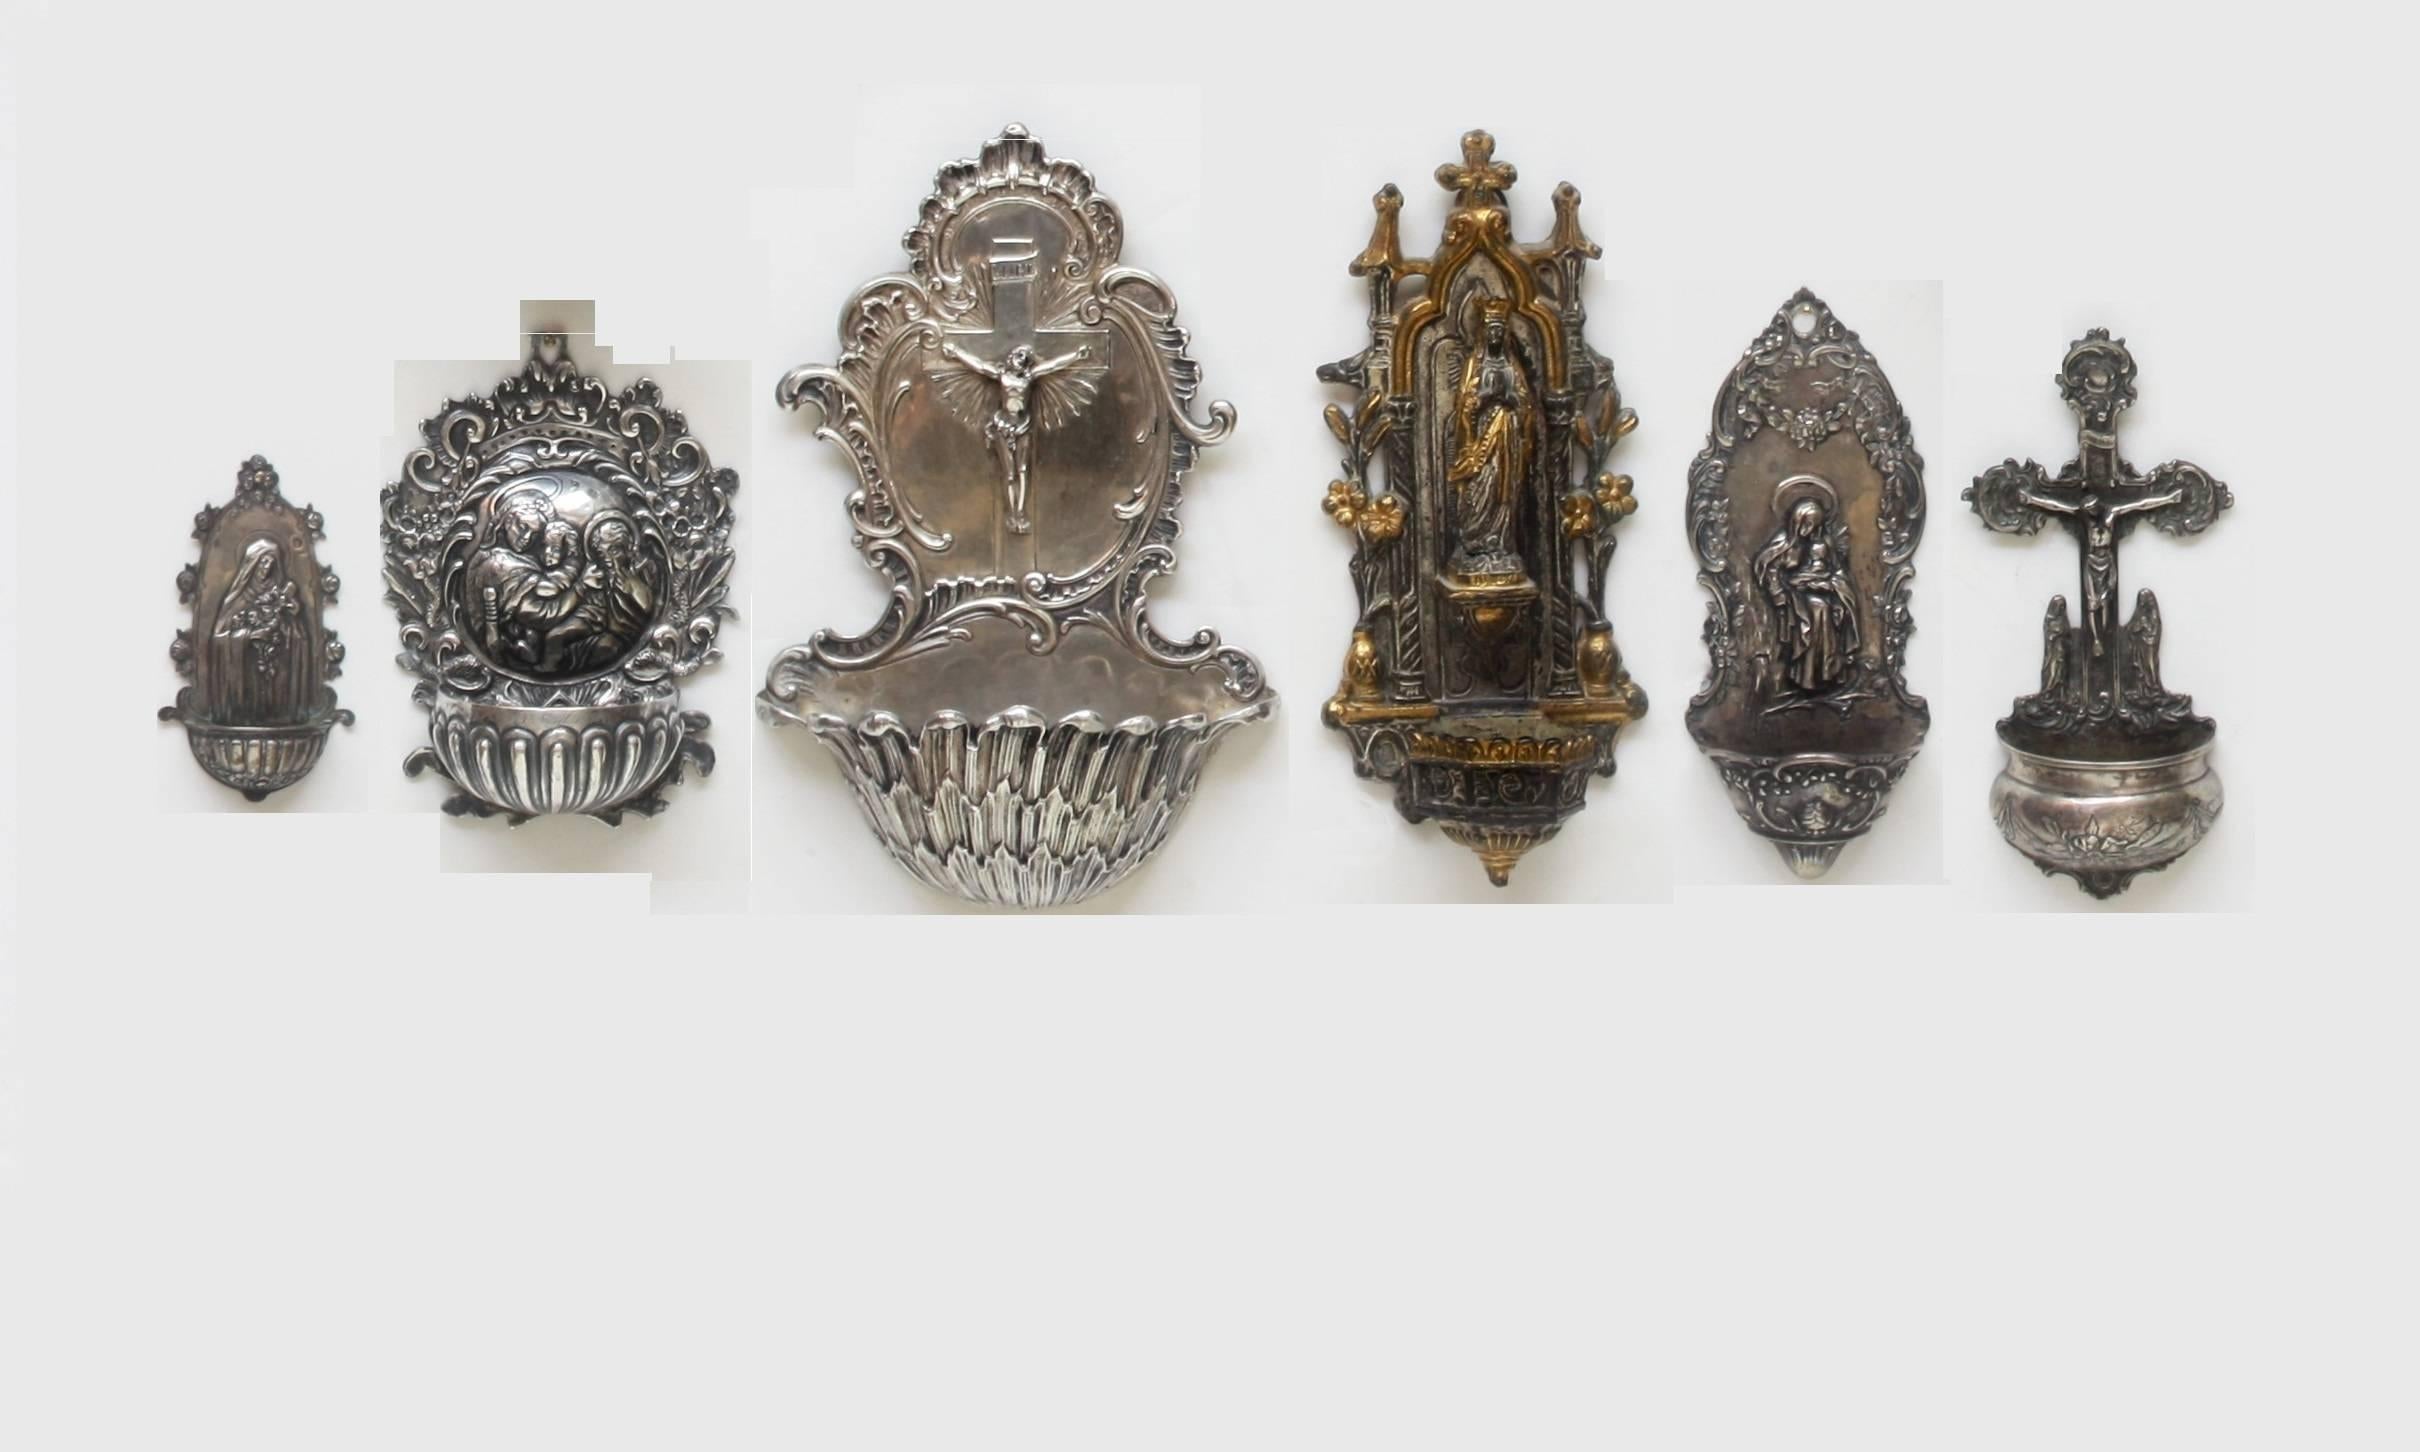 WILL SELL INDIVIDUAL PIECES FROM COLLECTION
in order, from left to right

IMAGE 3 
$295.00
antique sterling silver holy water font, scalloped edges with roses, image of St. Therese 